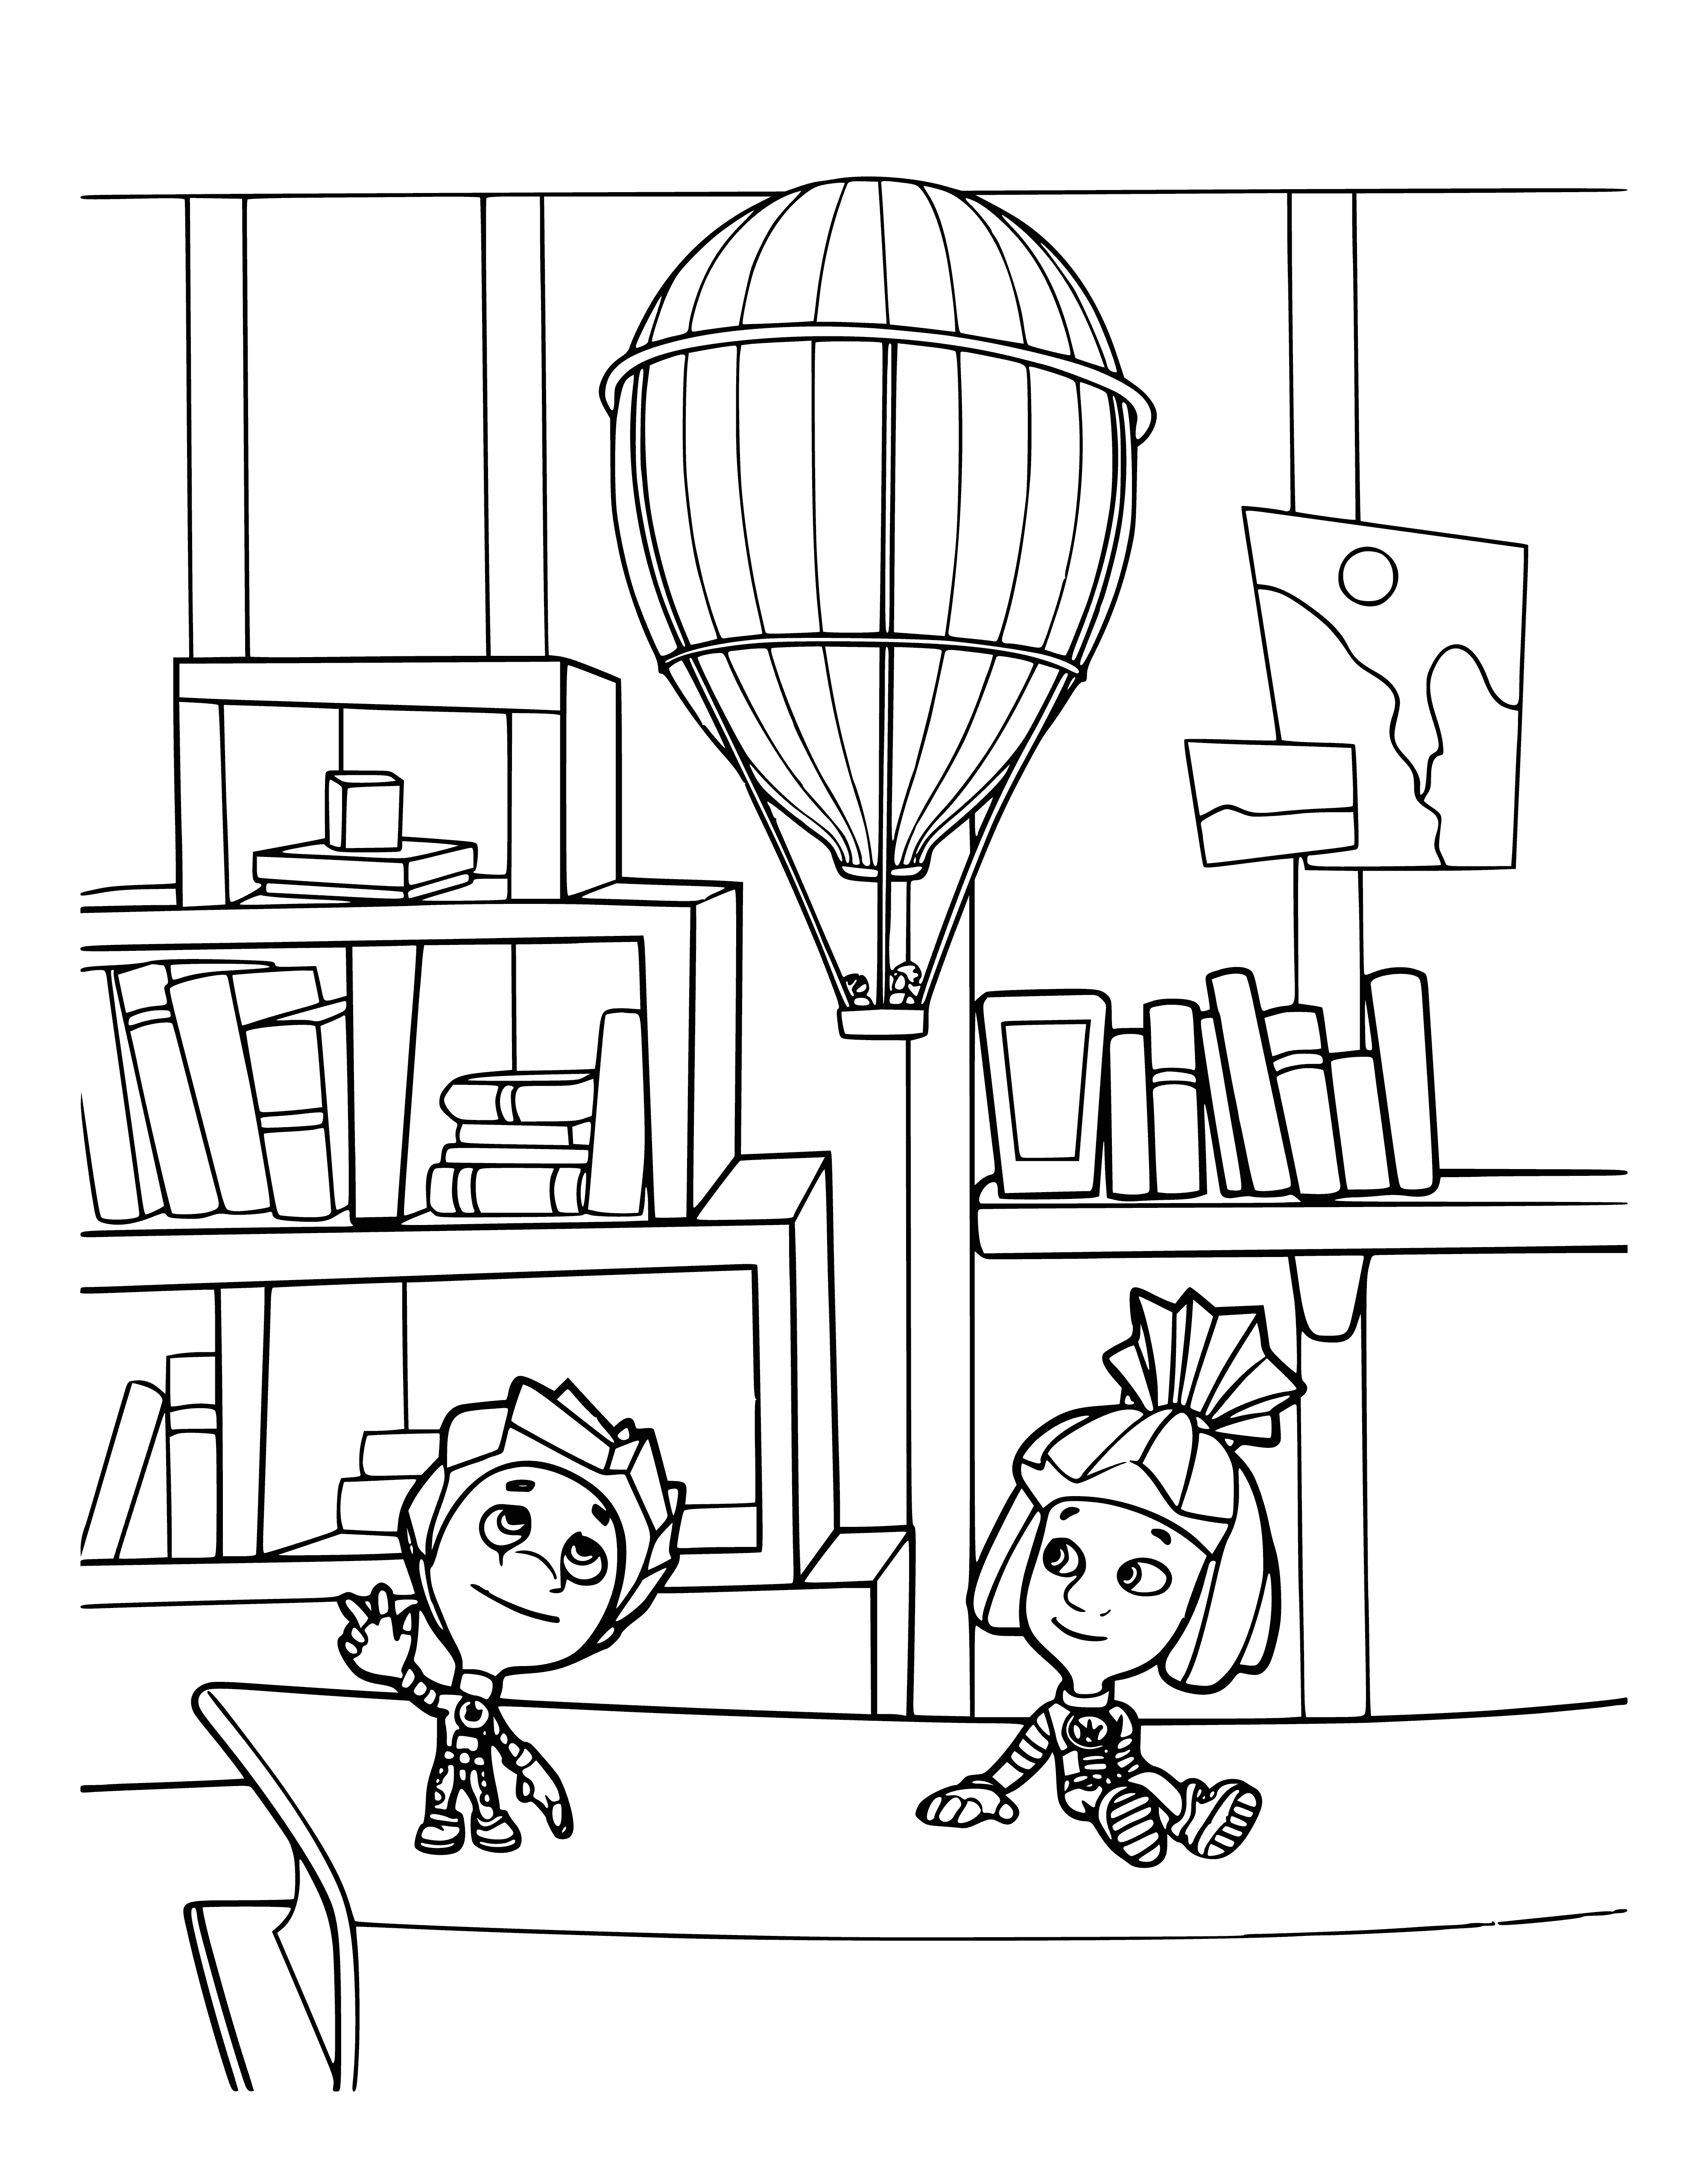 coloring page: Simka & Nolik, two creatures in blue overalls, use tools on a ladder to inspect something on the wall.